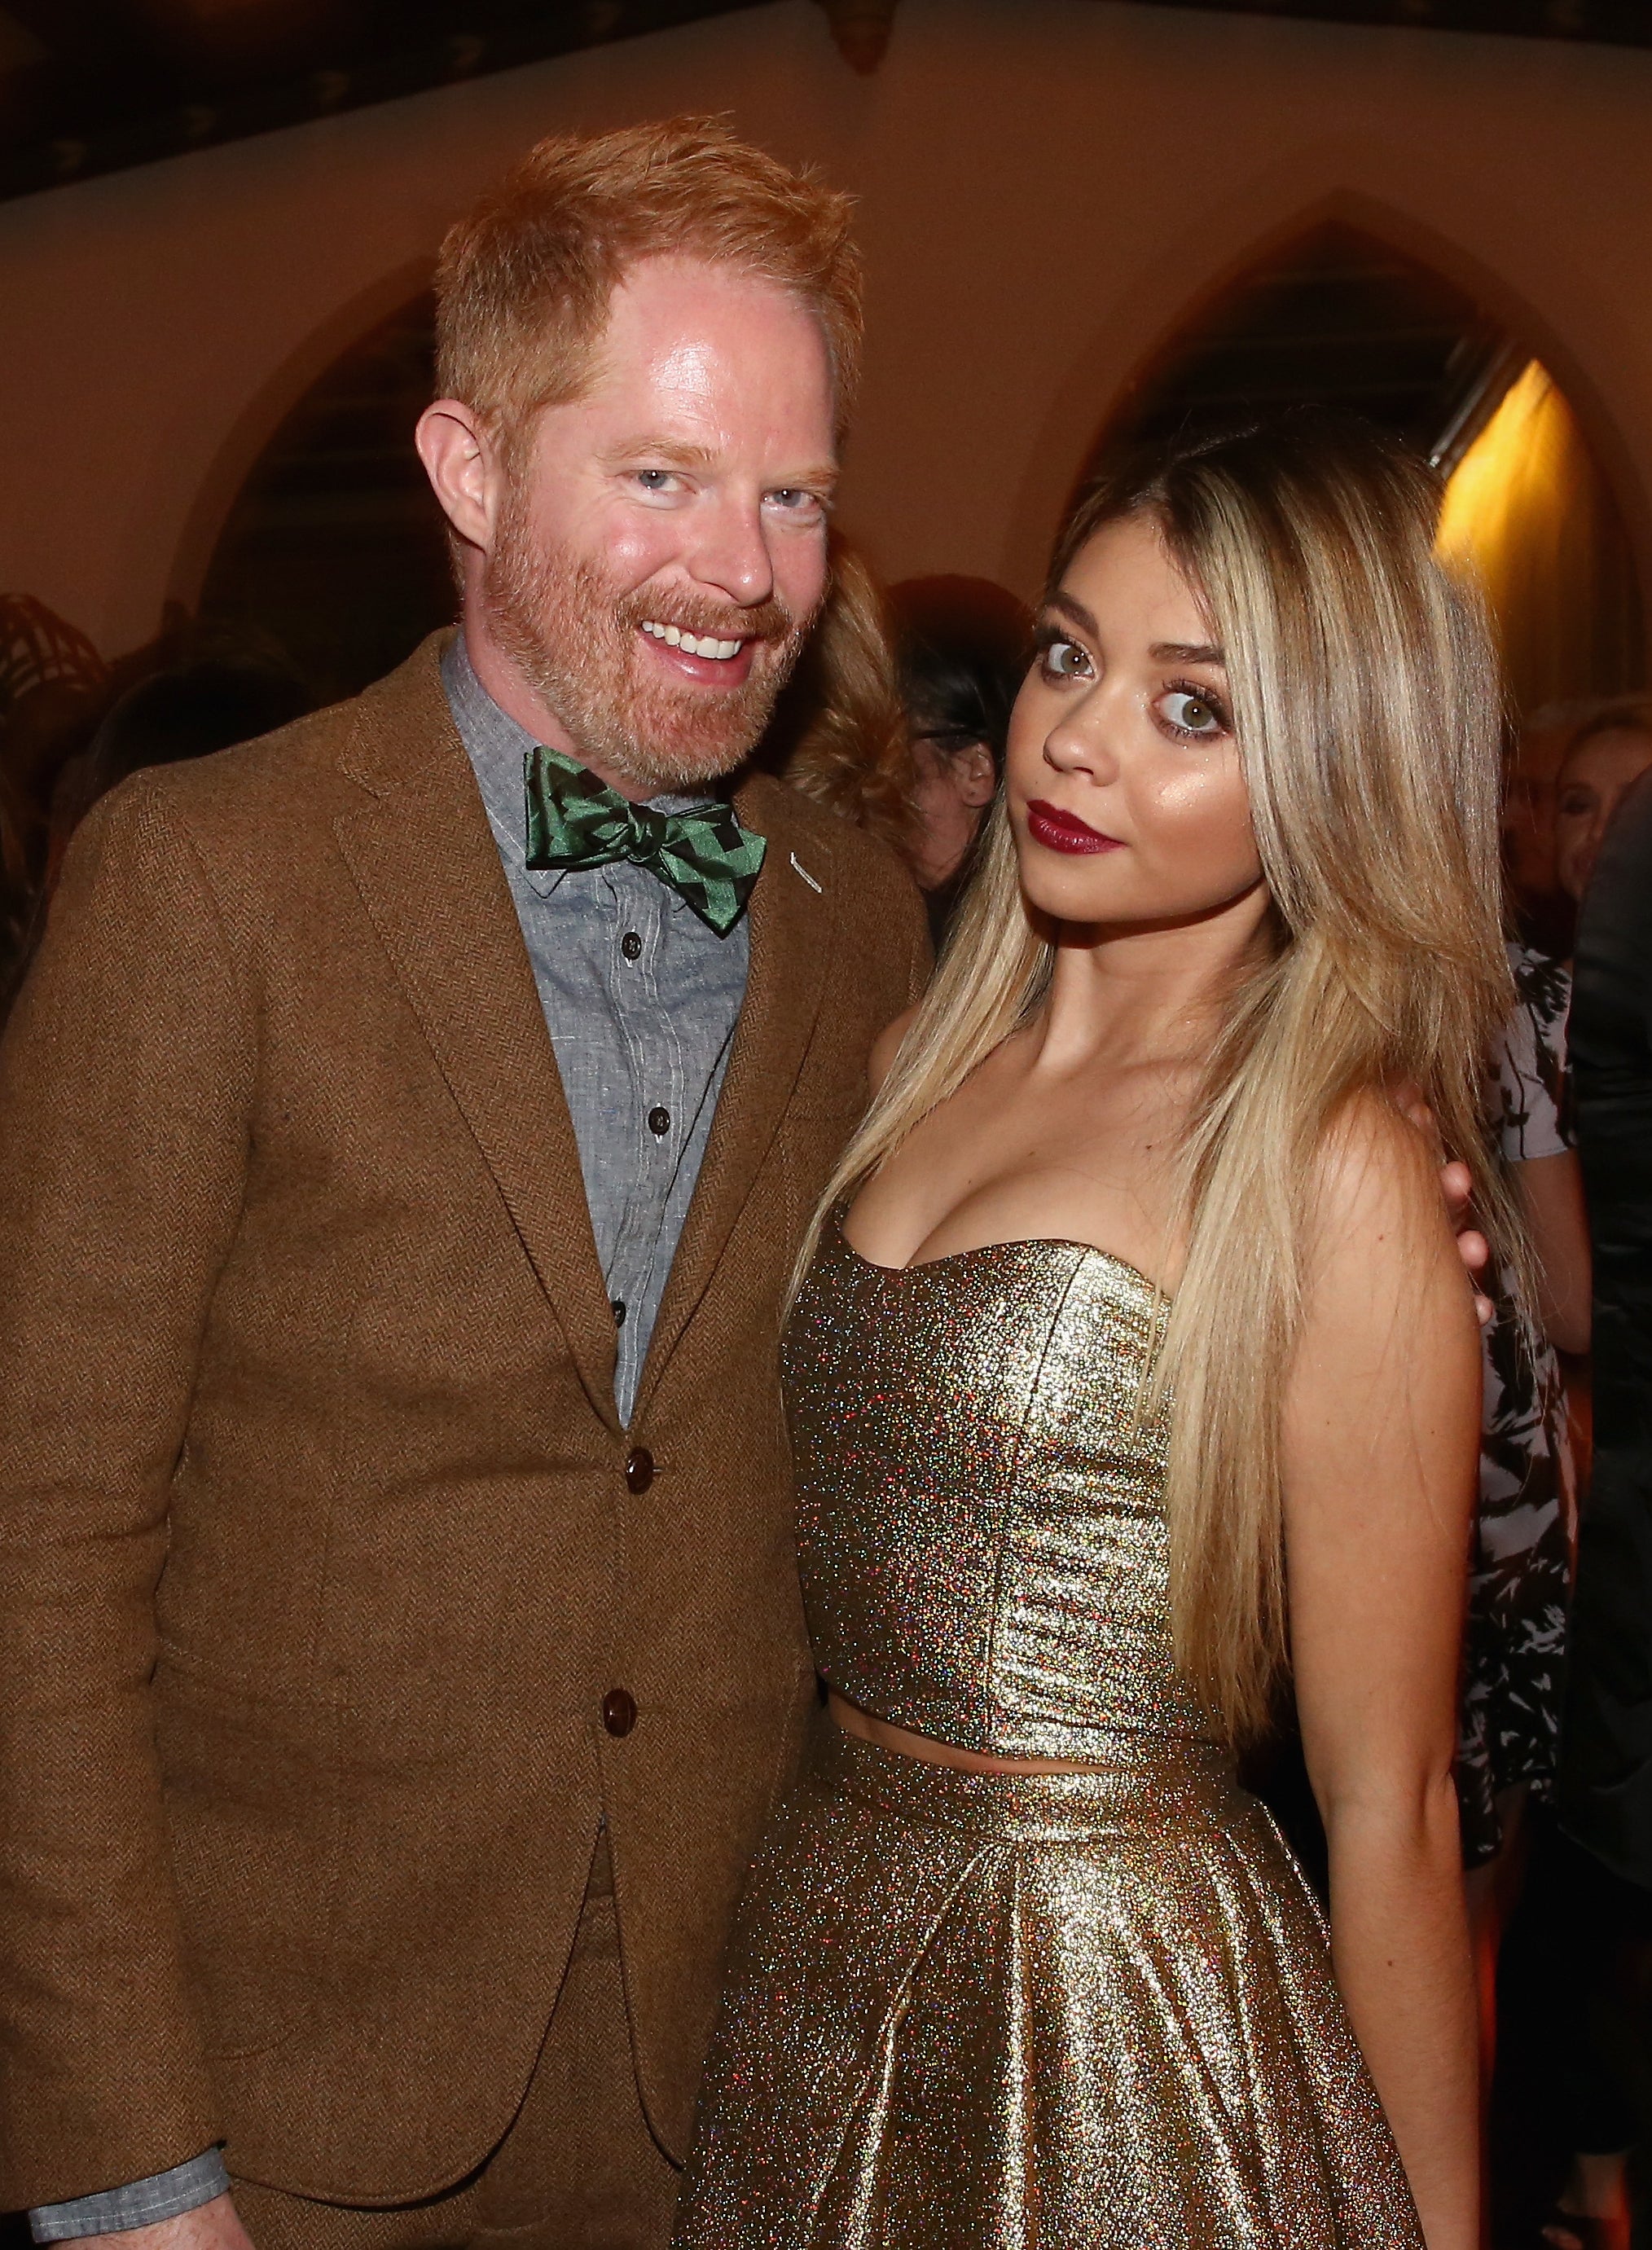 Jesse and Sarah pose for a photo together inside an event. Jesse is wearing a suit and bowtie and Sarah is wearing a strapless metallic top with matching skirt